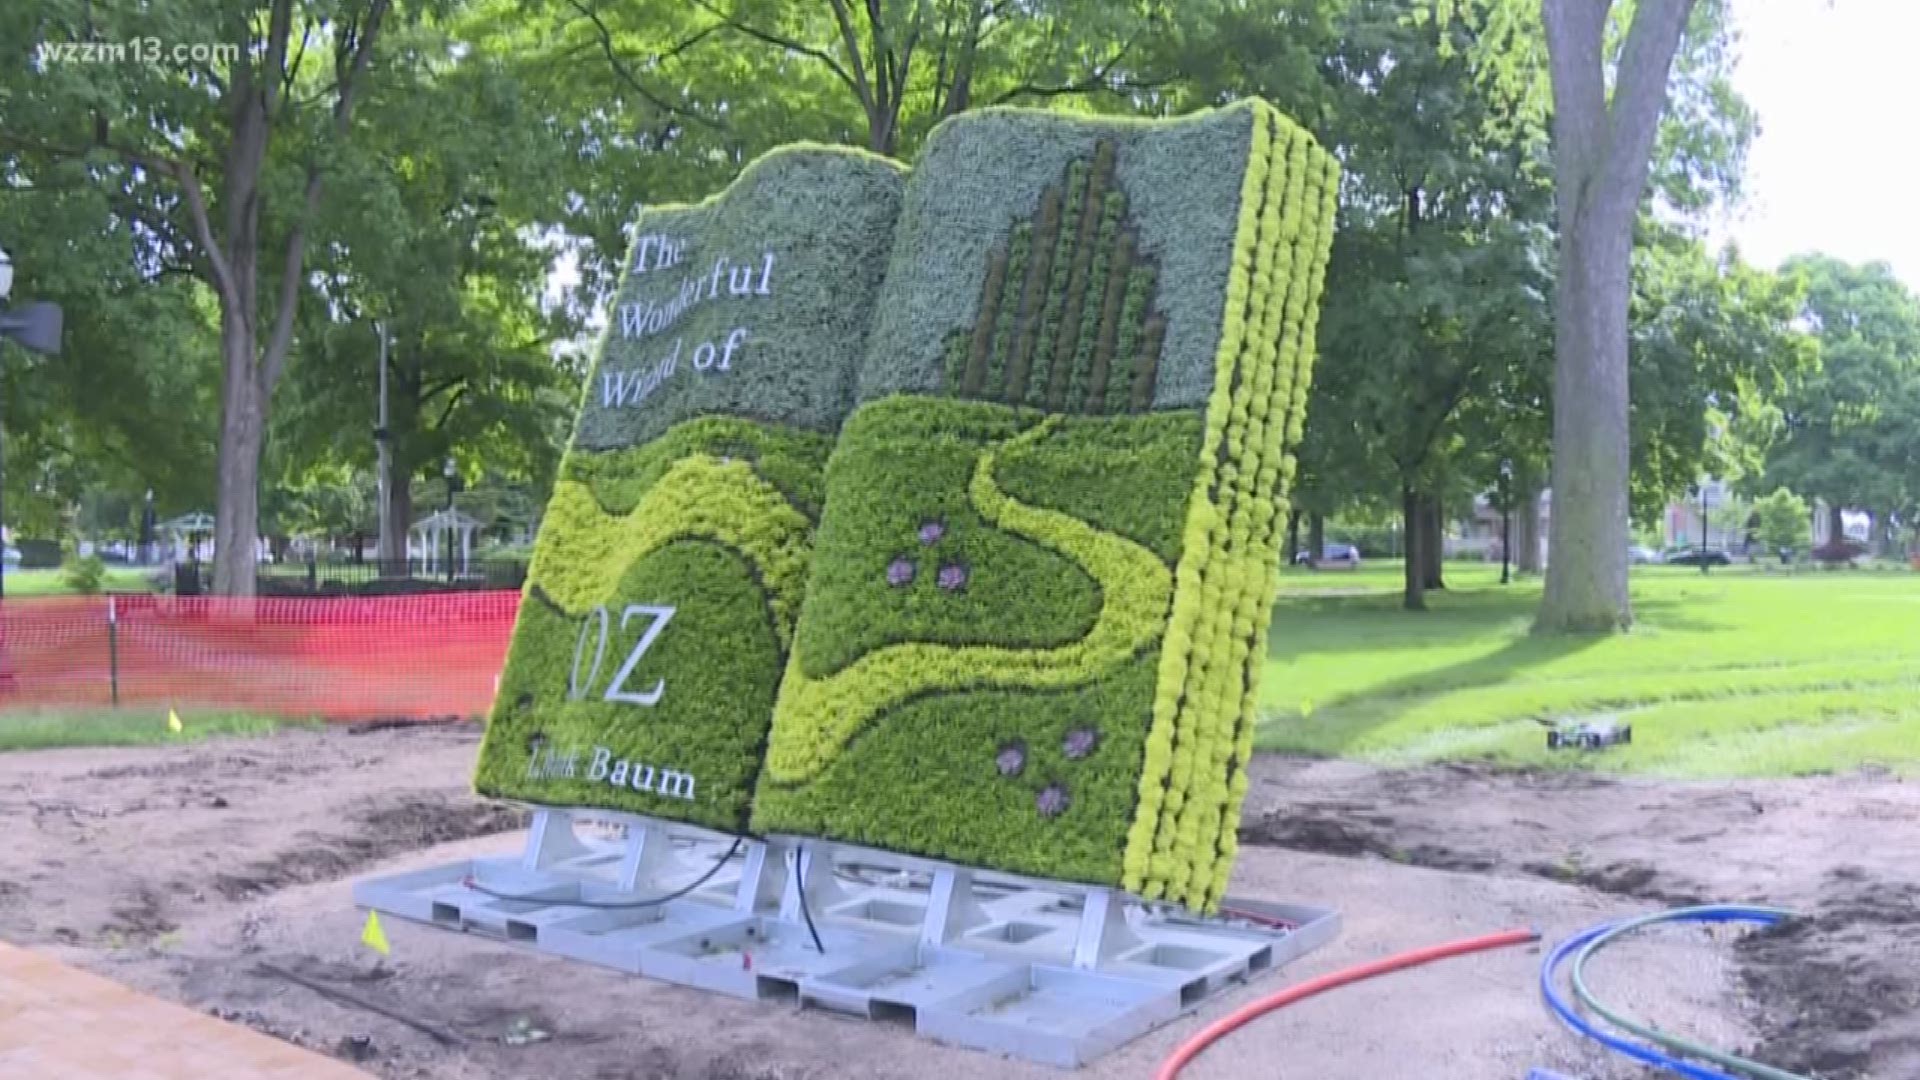 The exhibit is going up in Centennial Park later this morning.